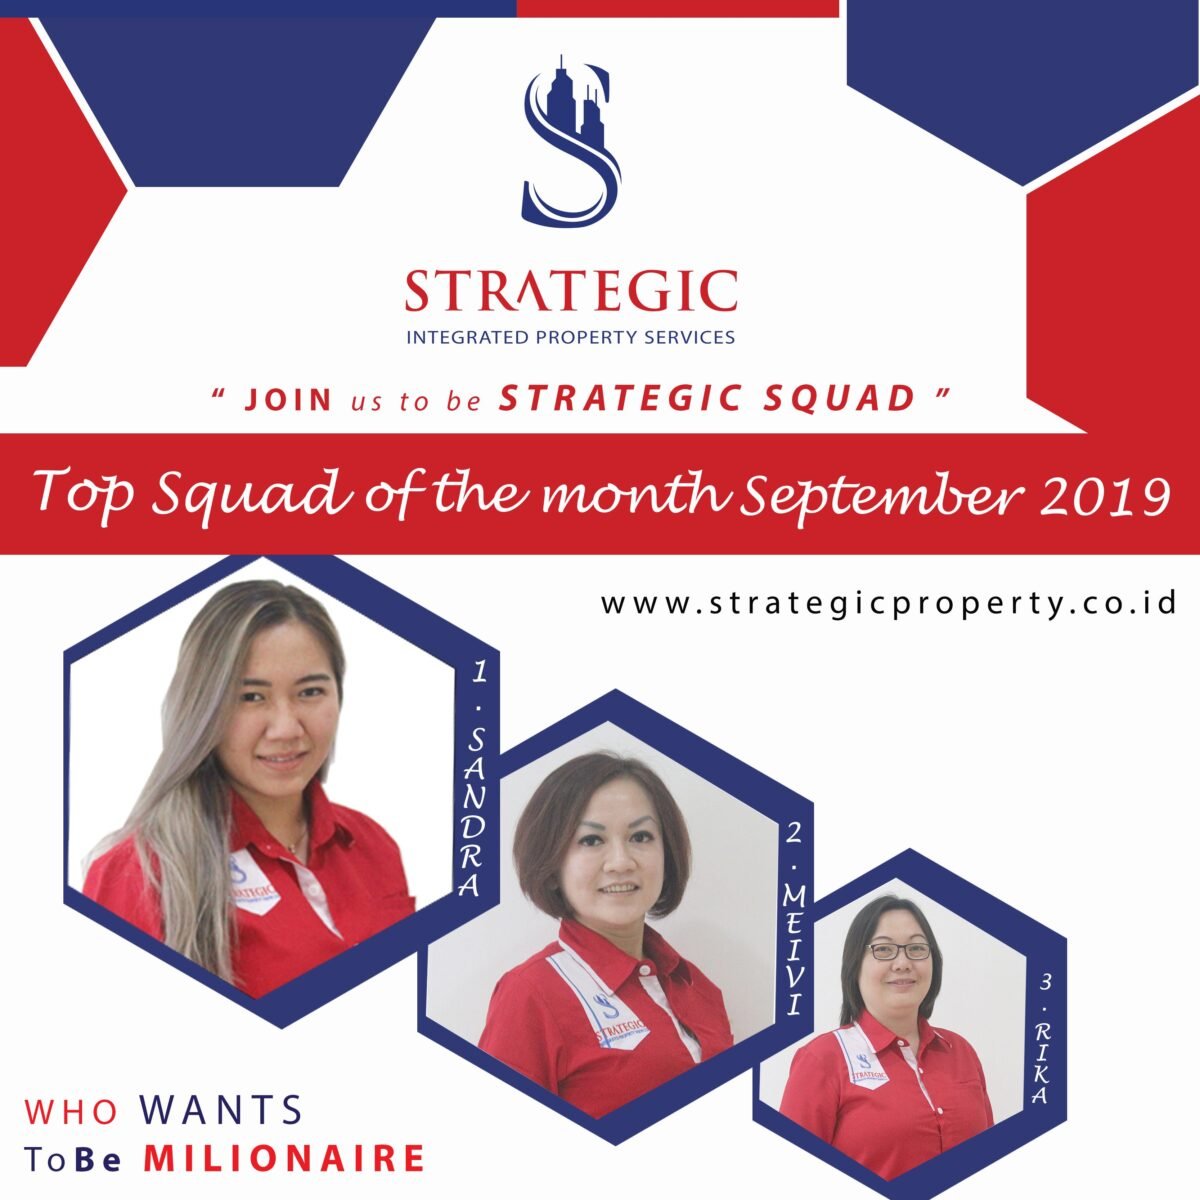 TOP SQUAD OF THE MONTH SEPTEMBER 2019 STRATEGIC PROPERTY